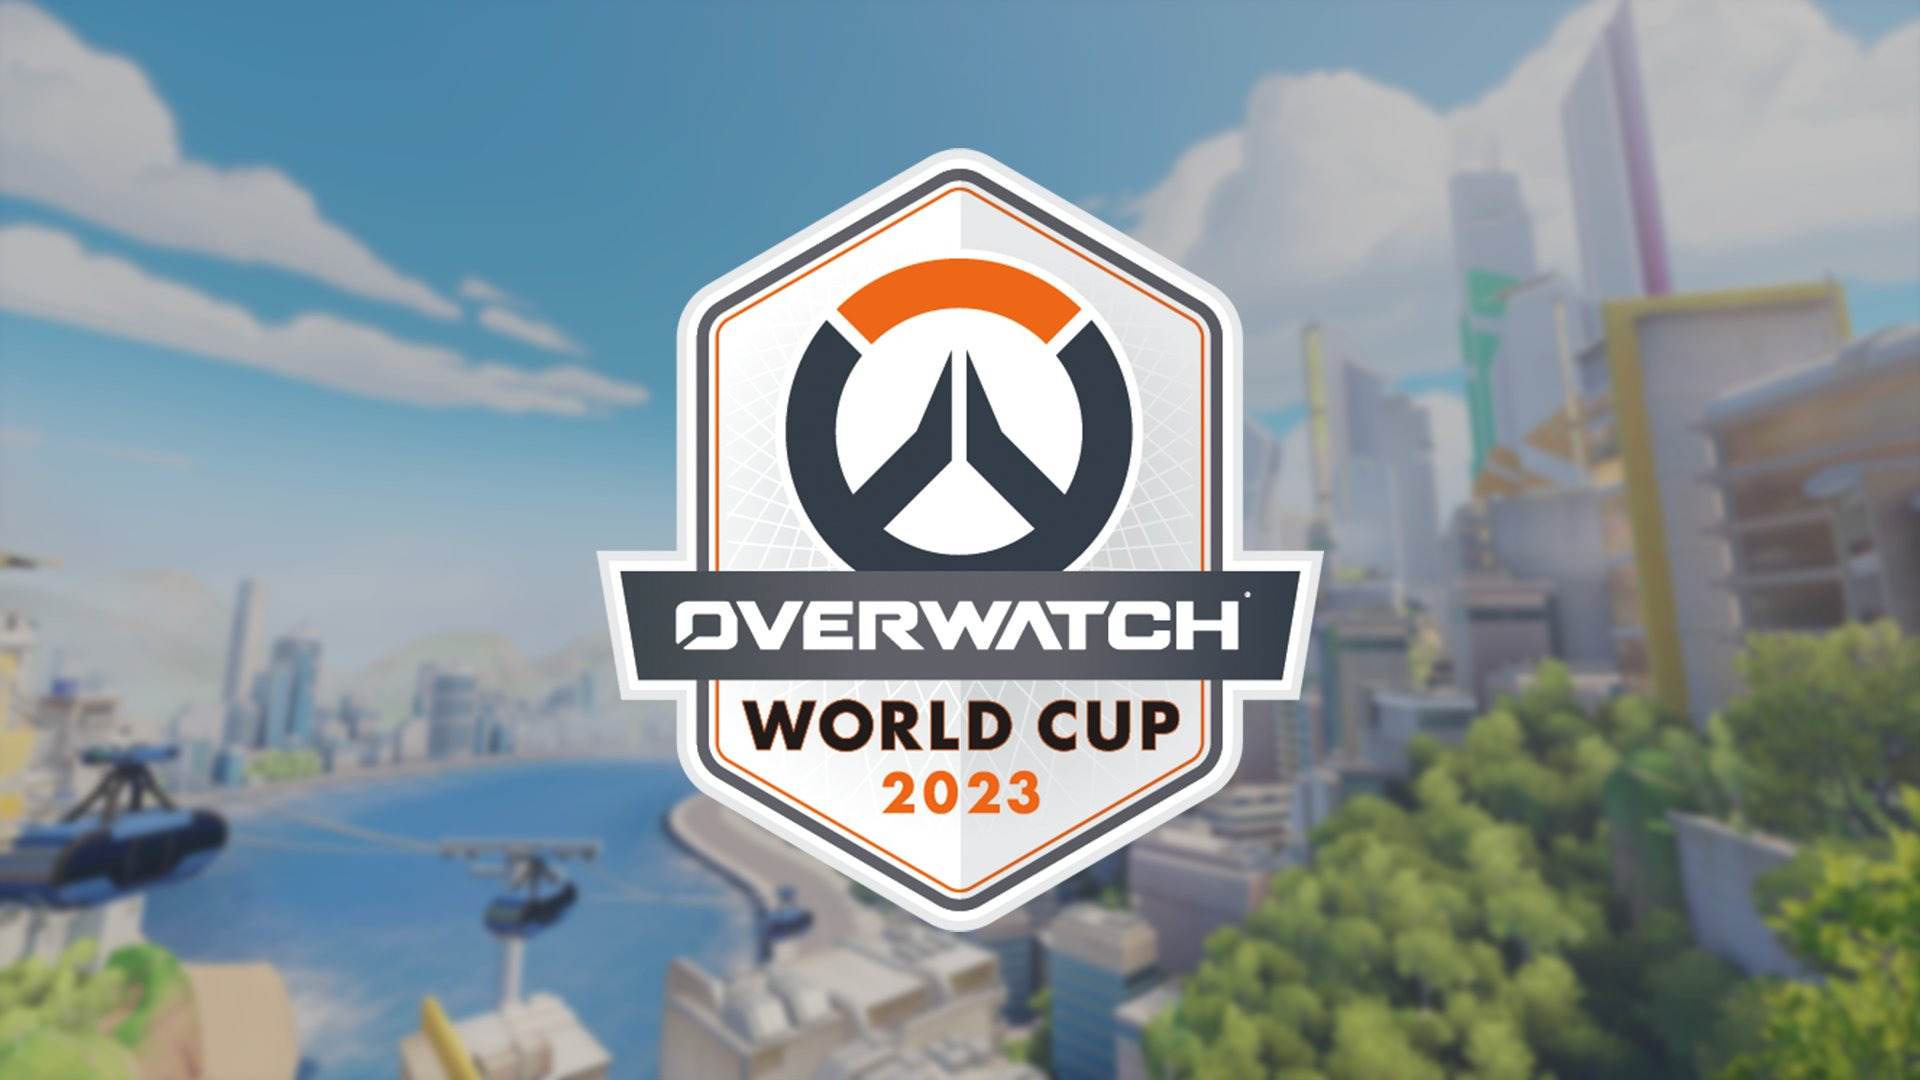 Overwatch World Cup dates, teams, prize pool, and how to watch